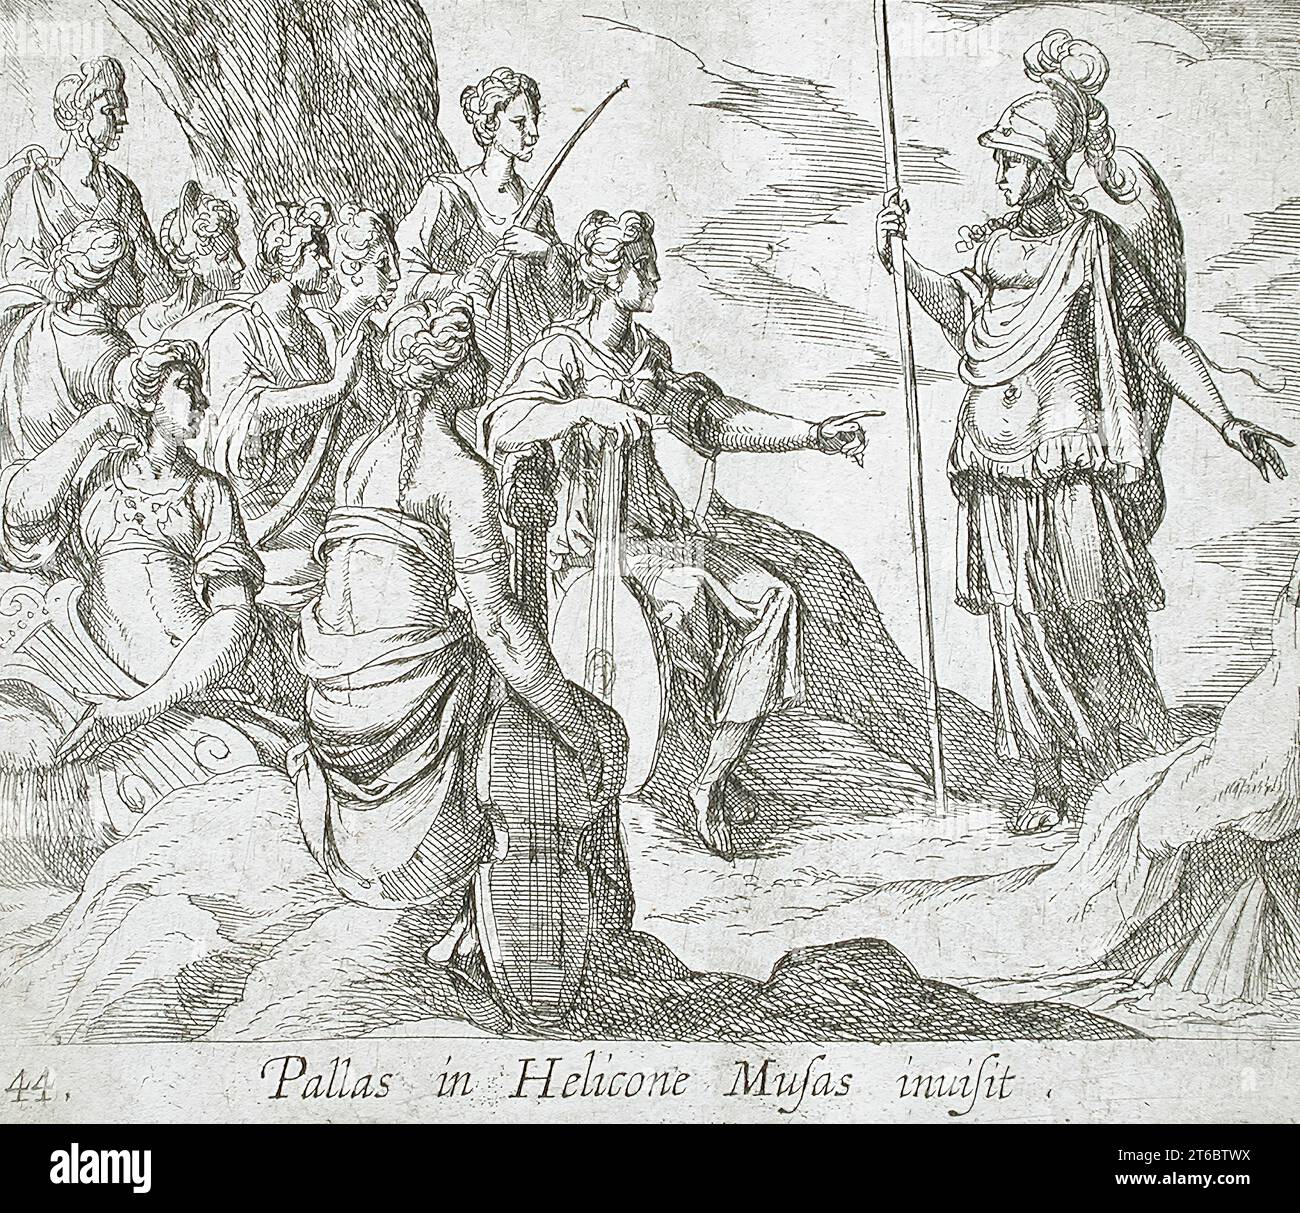 Athena with the Muses, published 1606. From The Metamorphoses of Ovid, pl. 44. Stock Photo